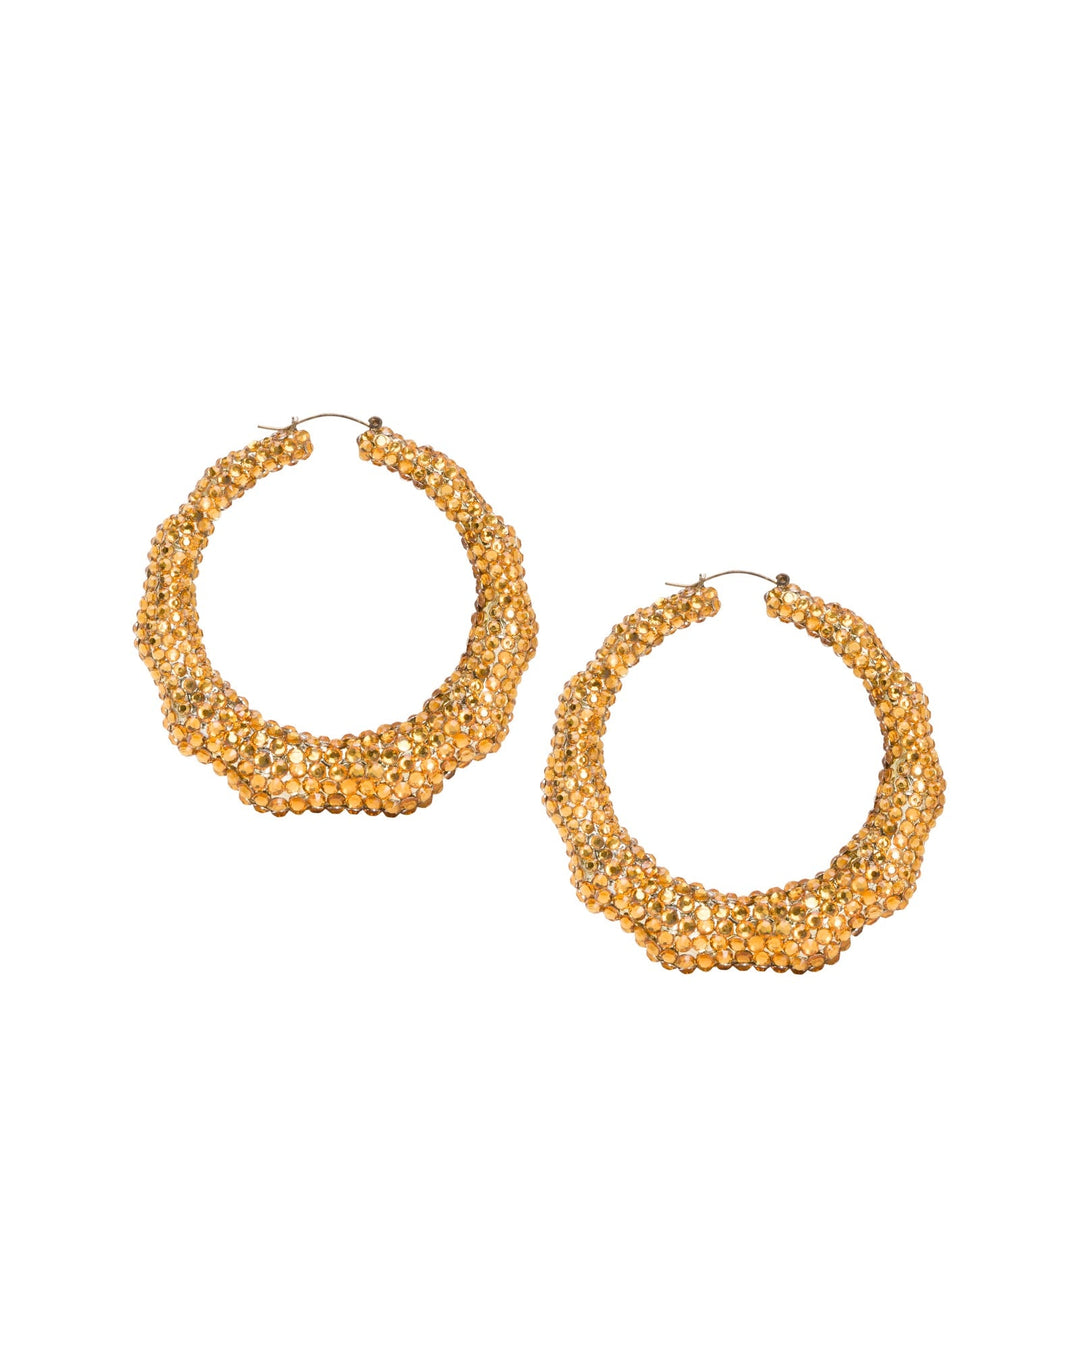 Super Bamboo Rhinestone Hoops - Gold - Limited Edition by Meghan Fabulous